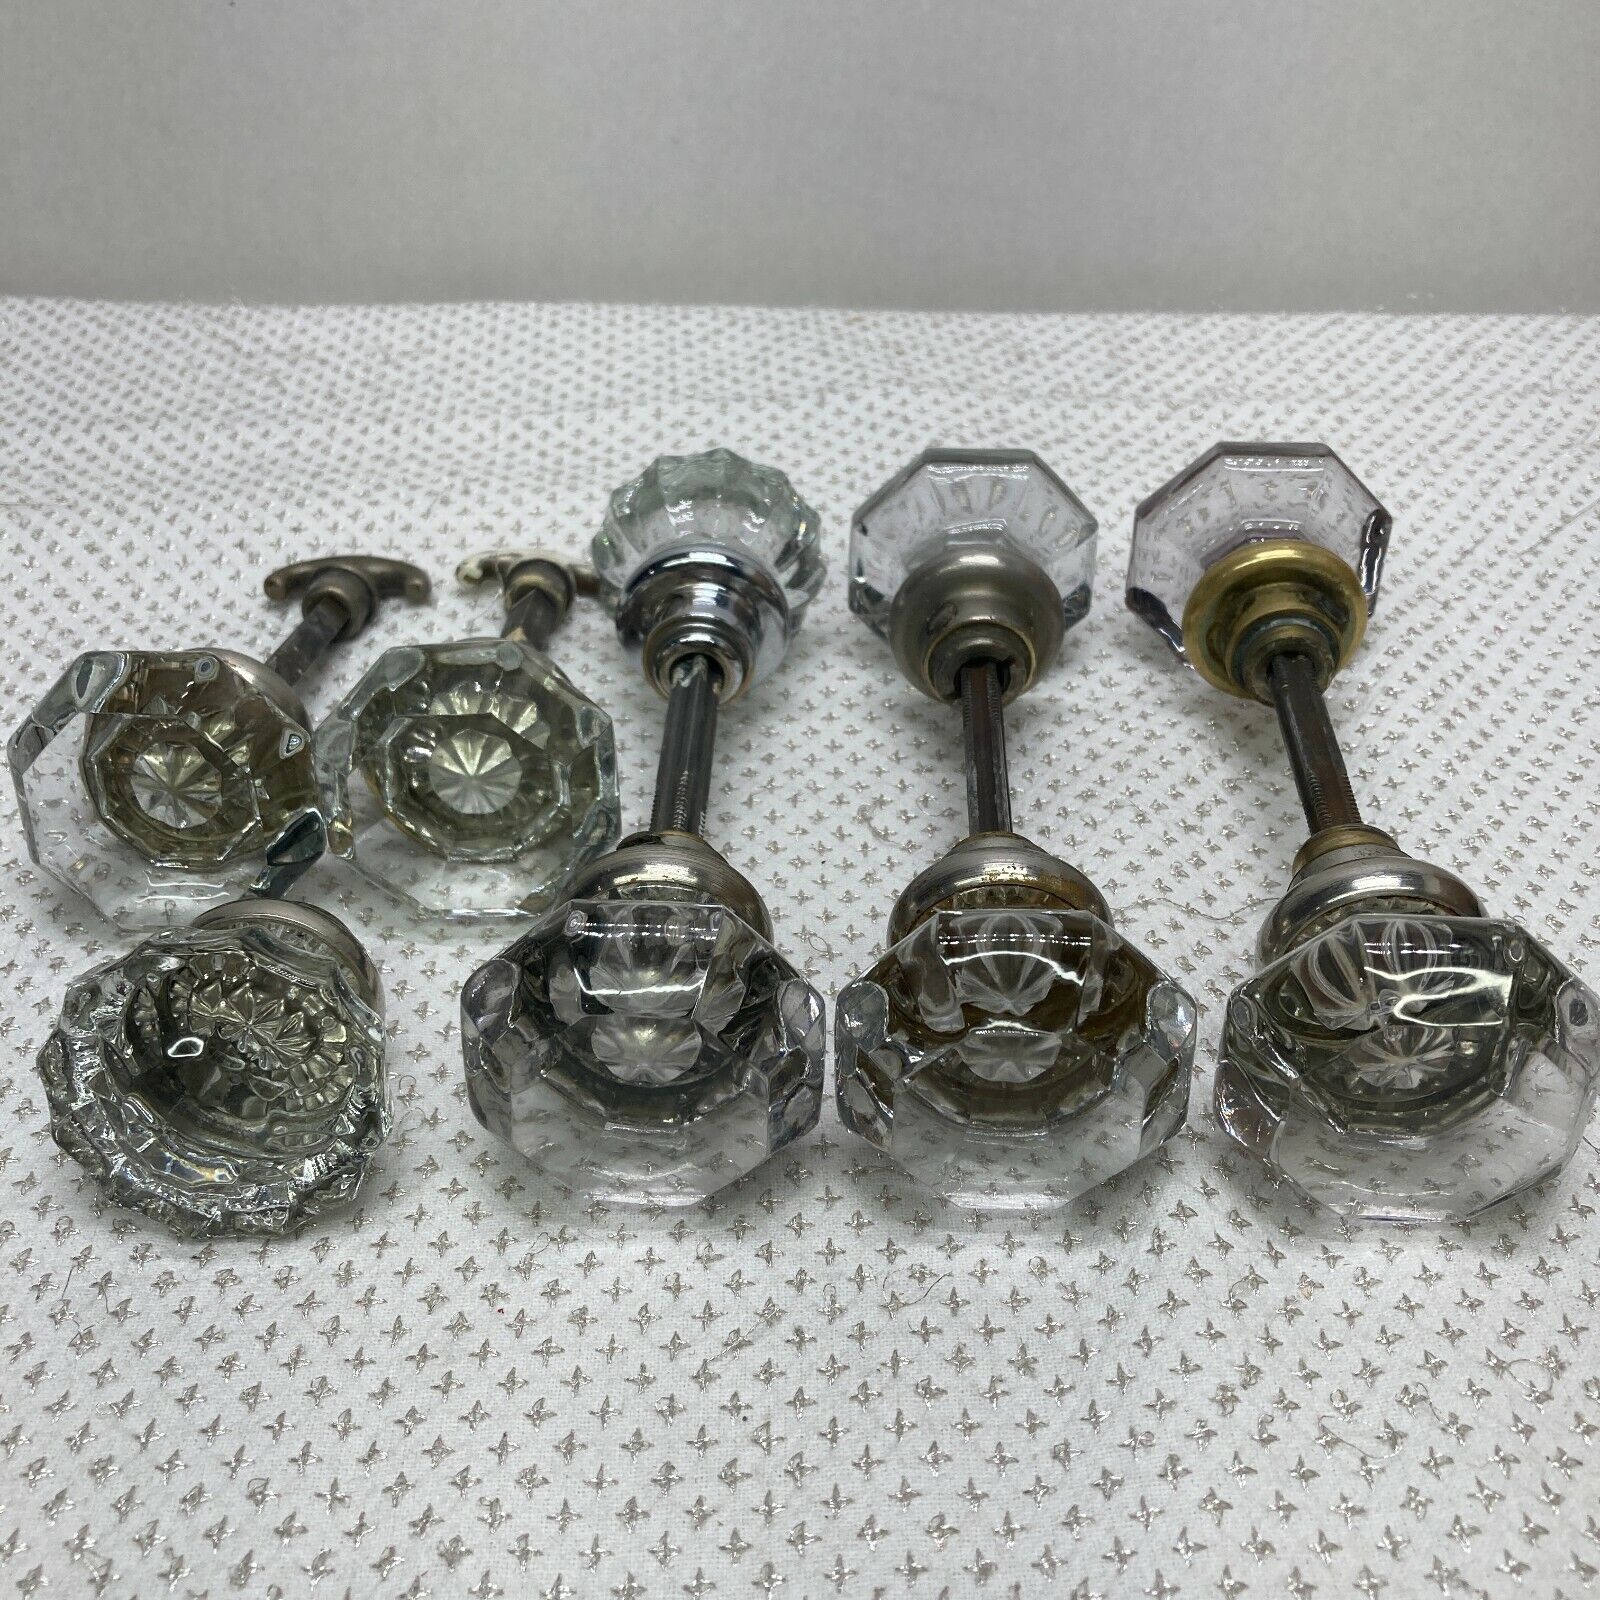 Vintage Glass Door Knob lot - 8 Point and 12 point knobs (9 knob